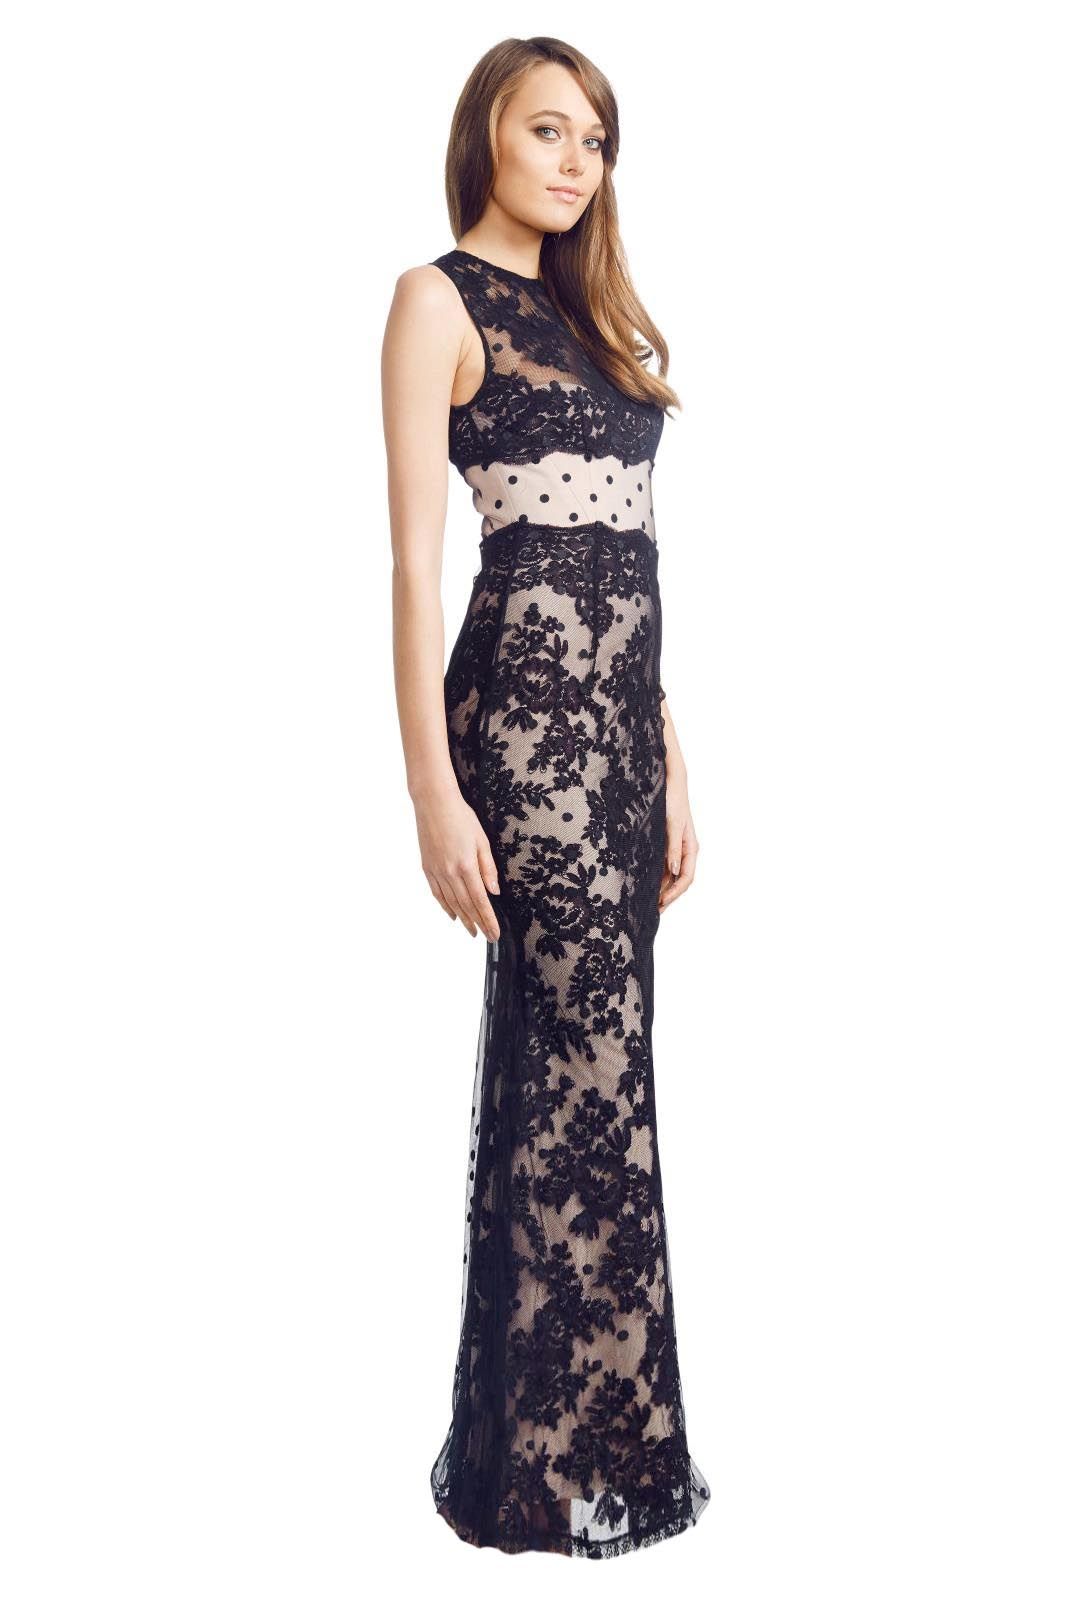 Alex Perry - Ancelina Gown - Black - Side